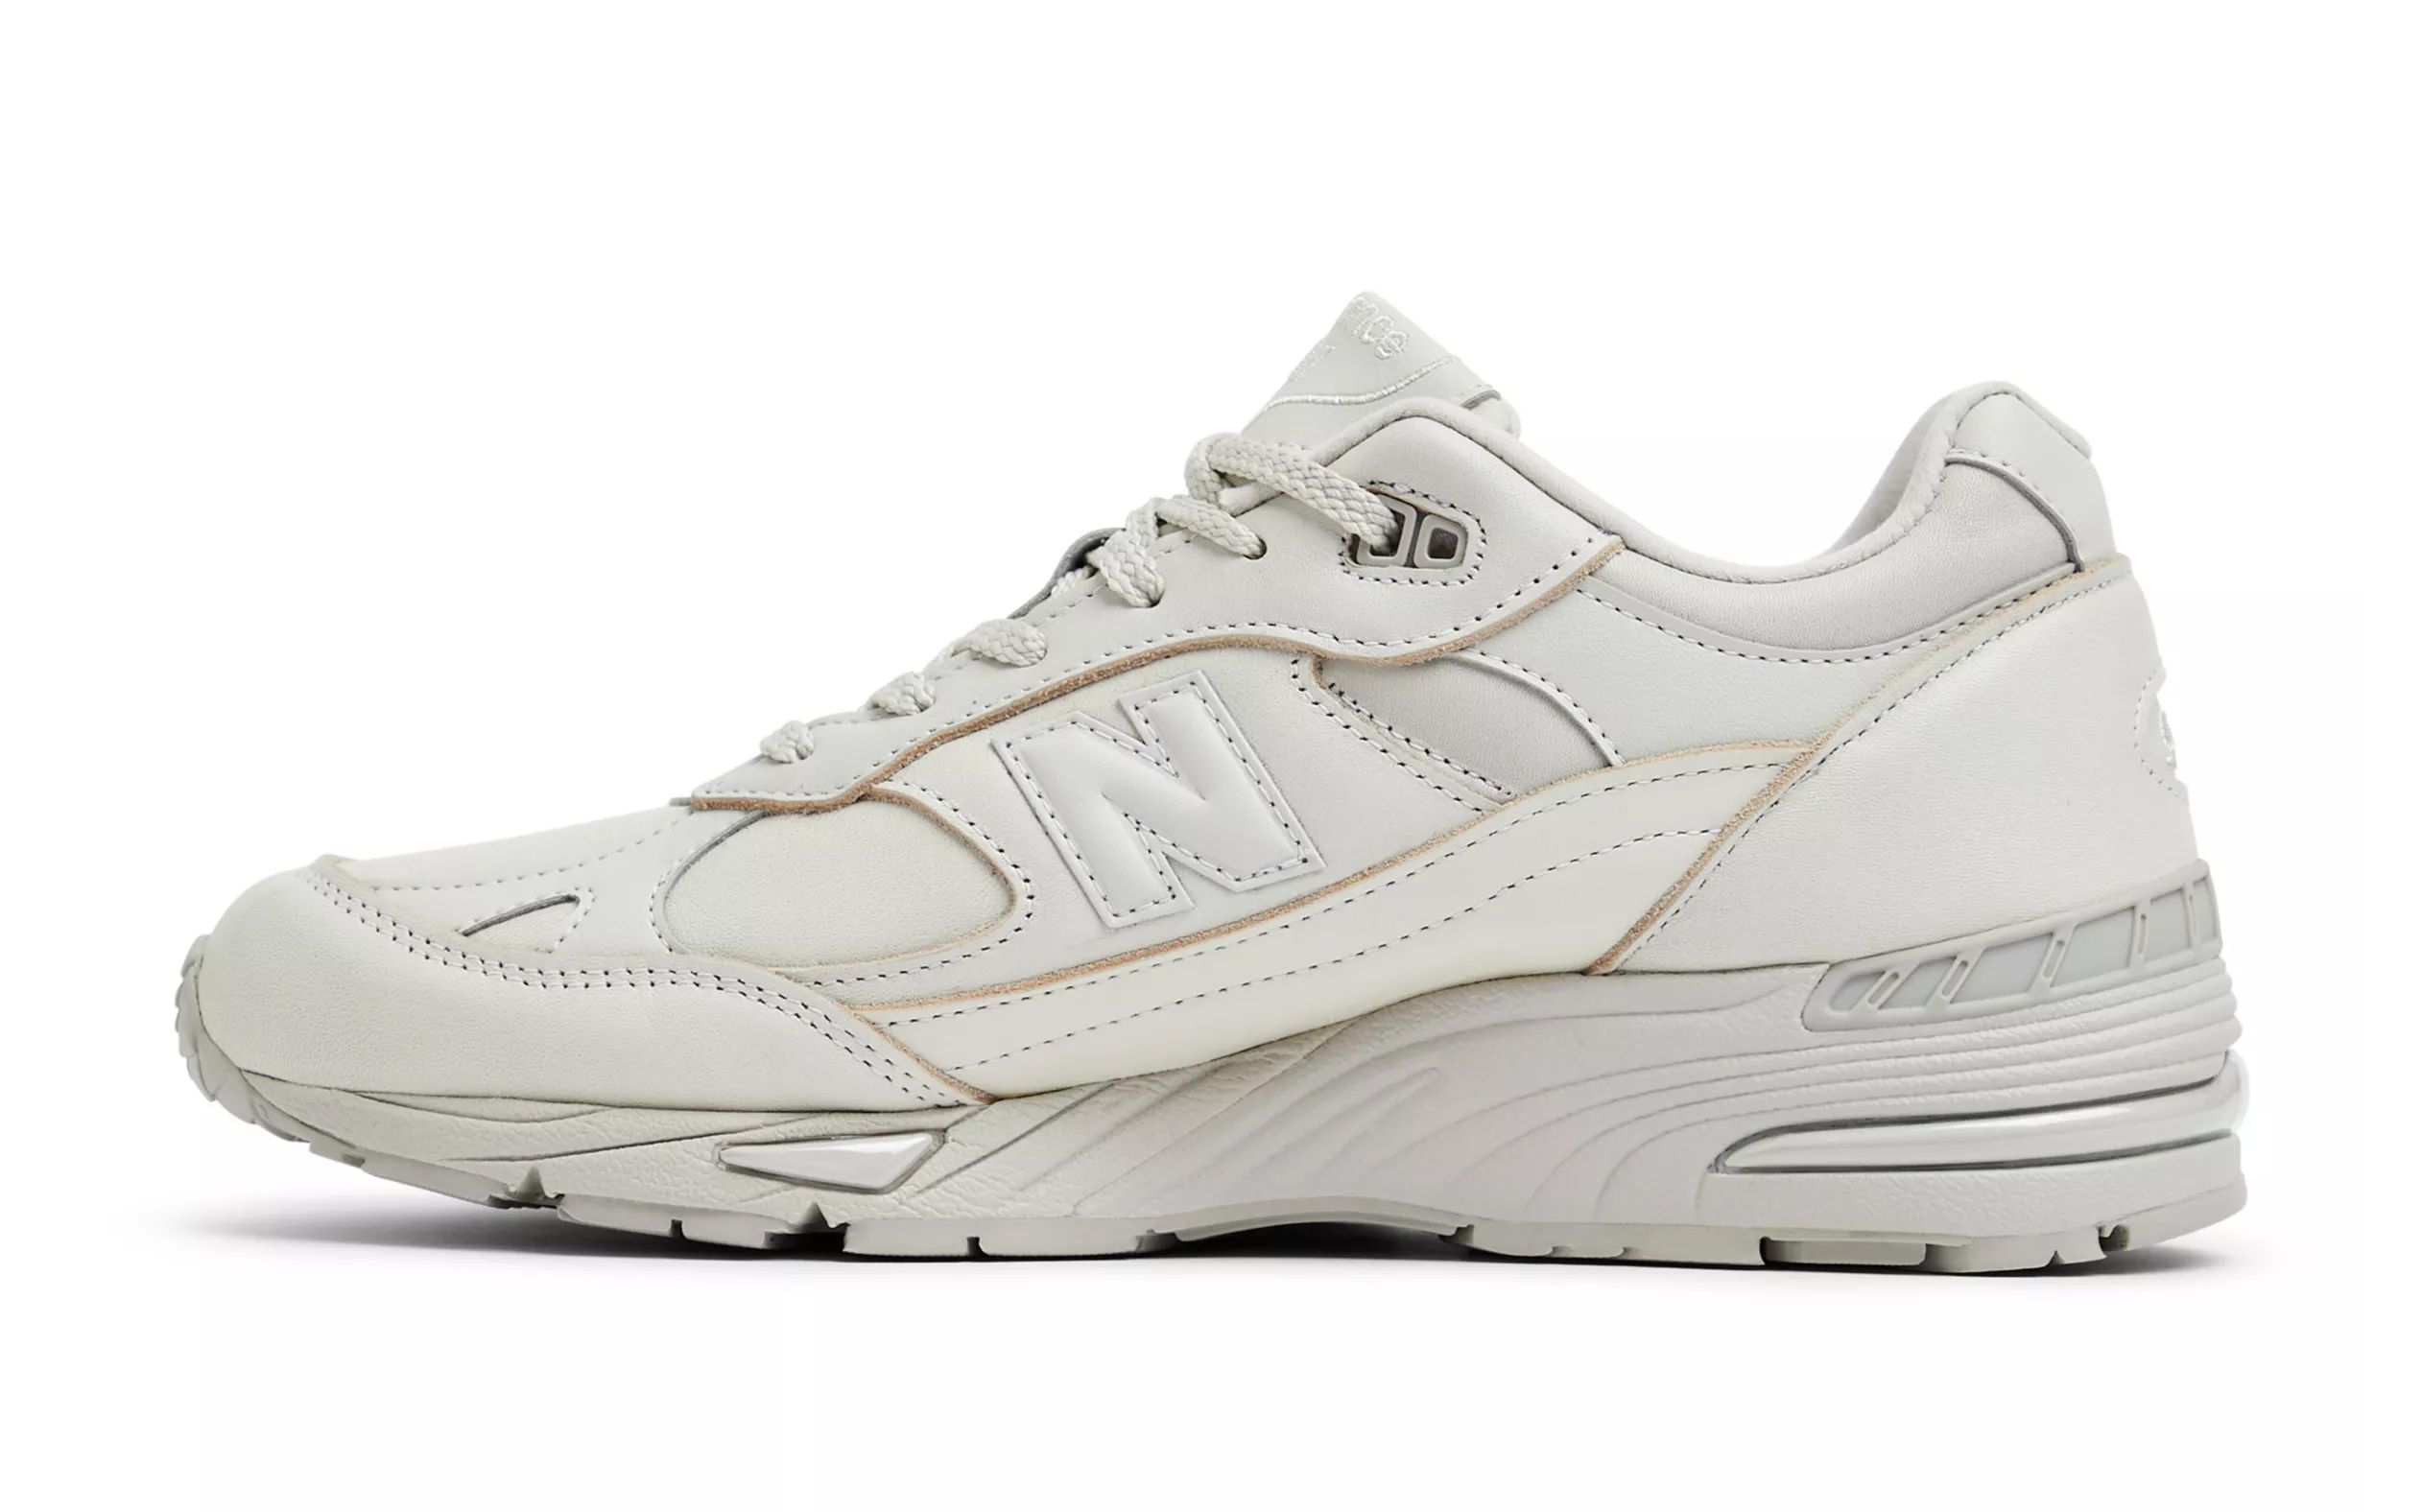 The Next New Balance 991 Arrives in Off White | House of Heat°